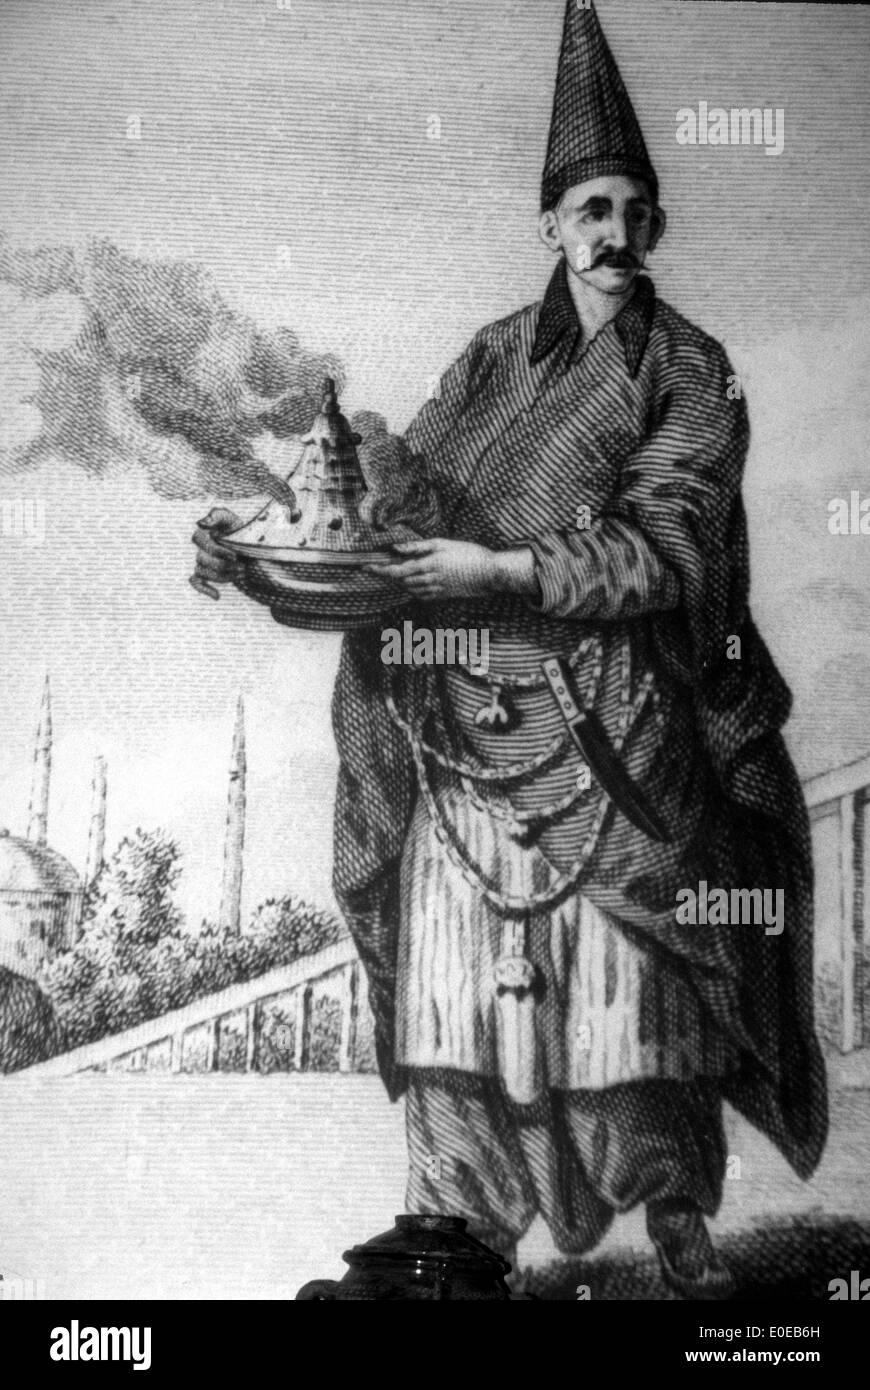 Ottoman chef with hot dish in the kitchen of the Topkapi Palace in Istanbul, Turkey Stock Photo